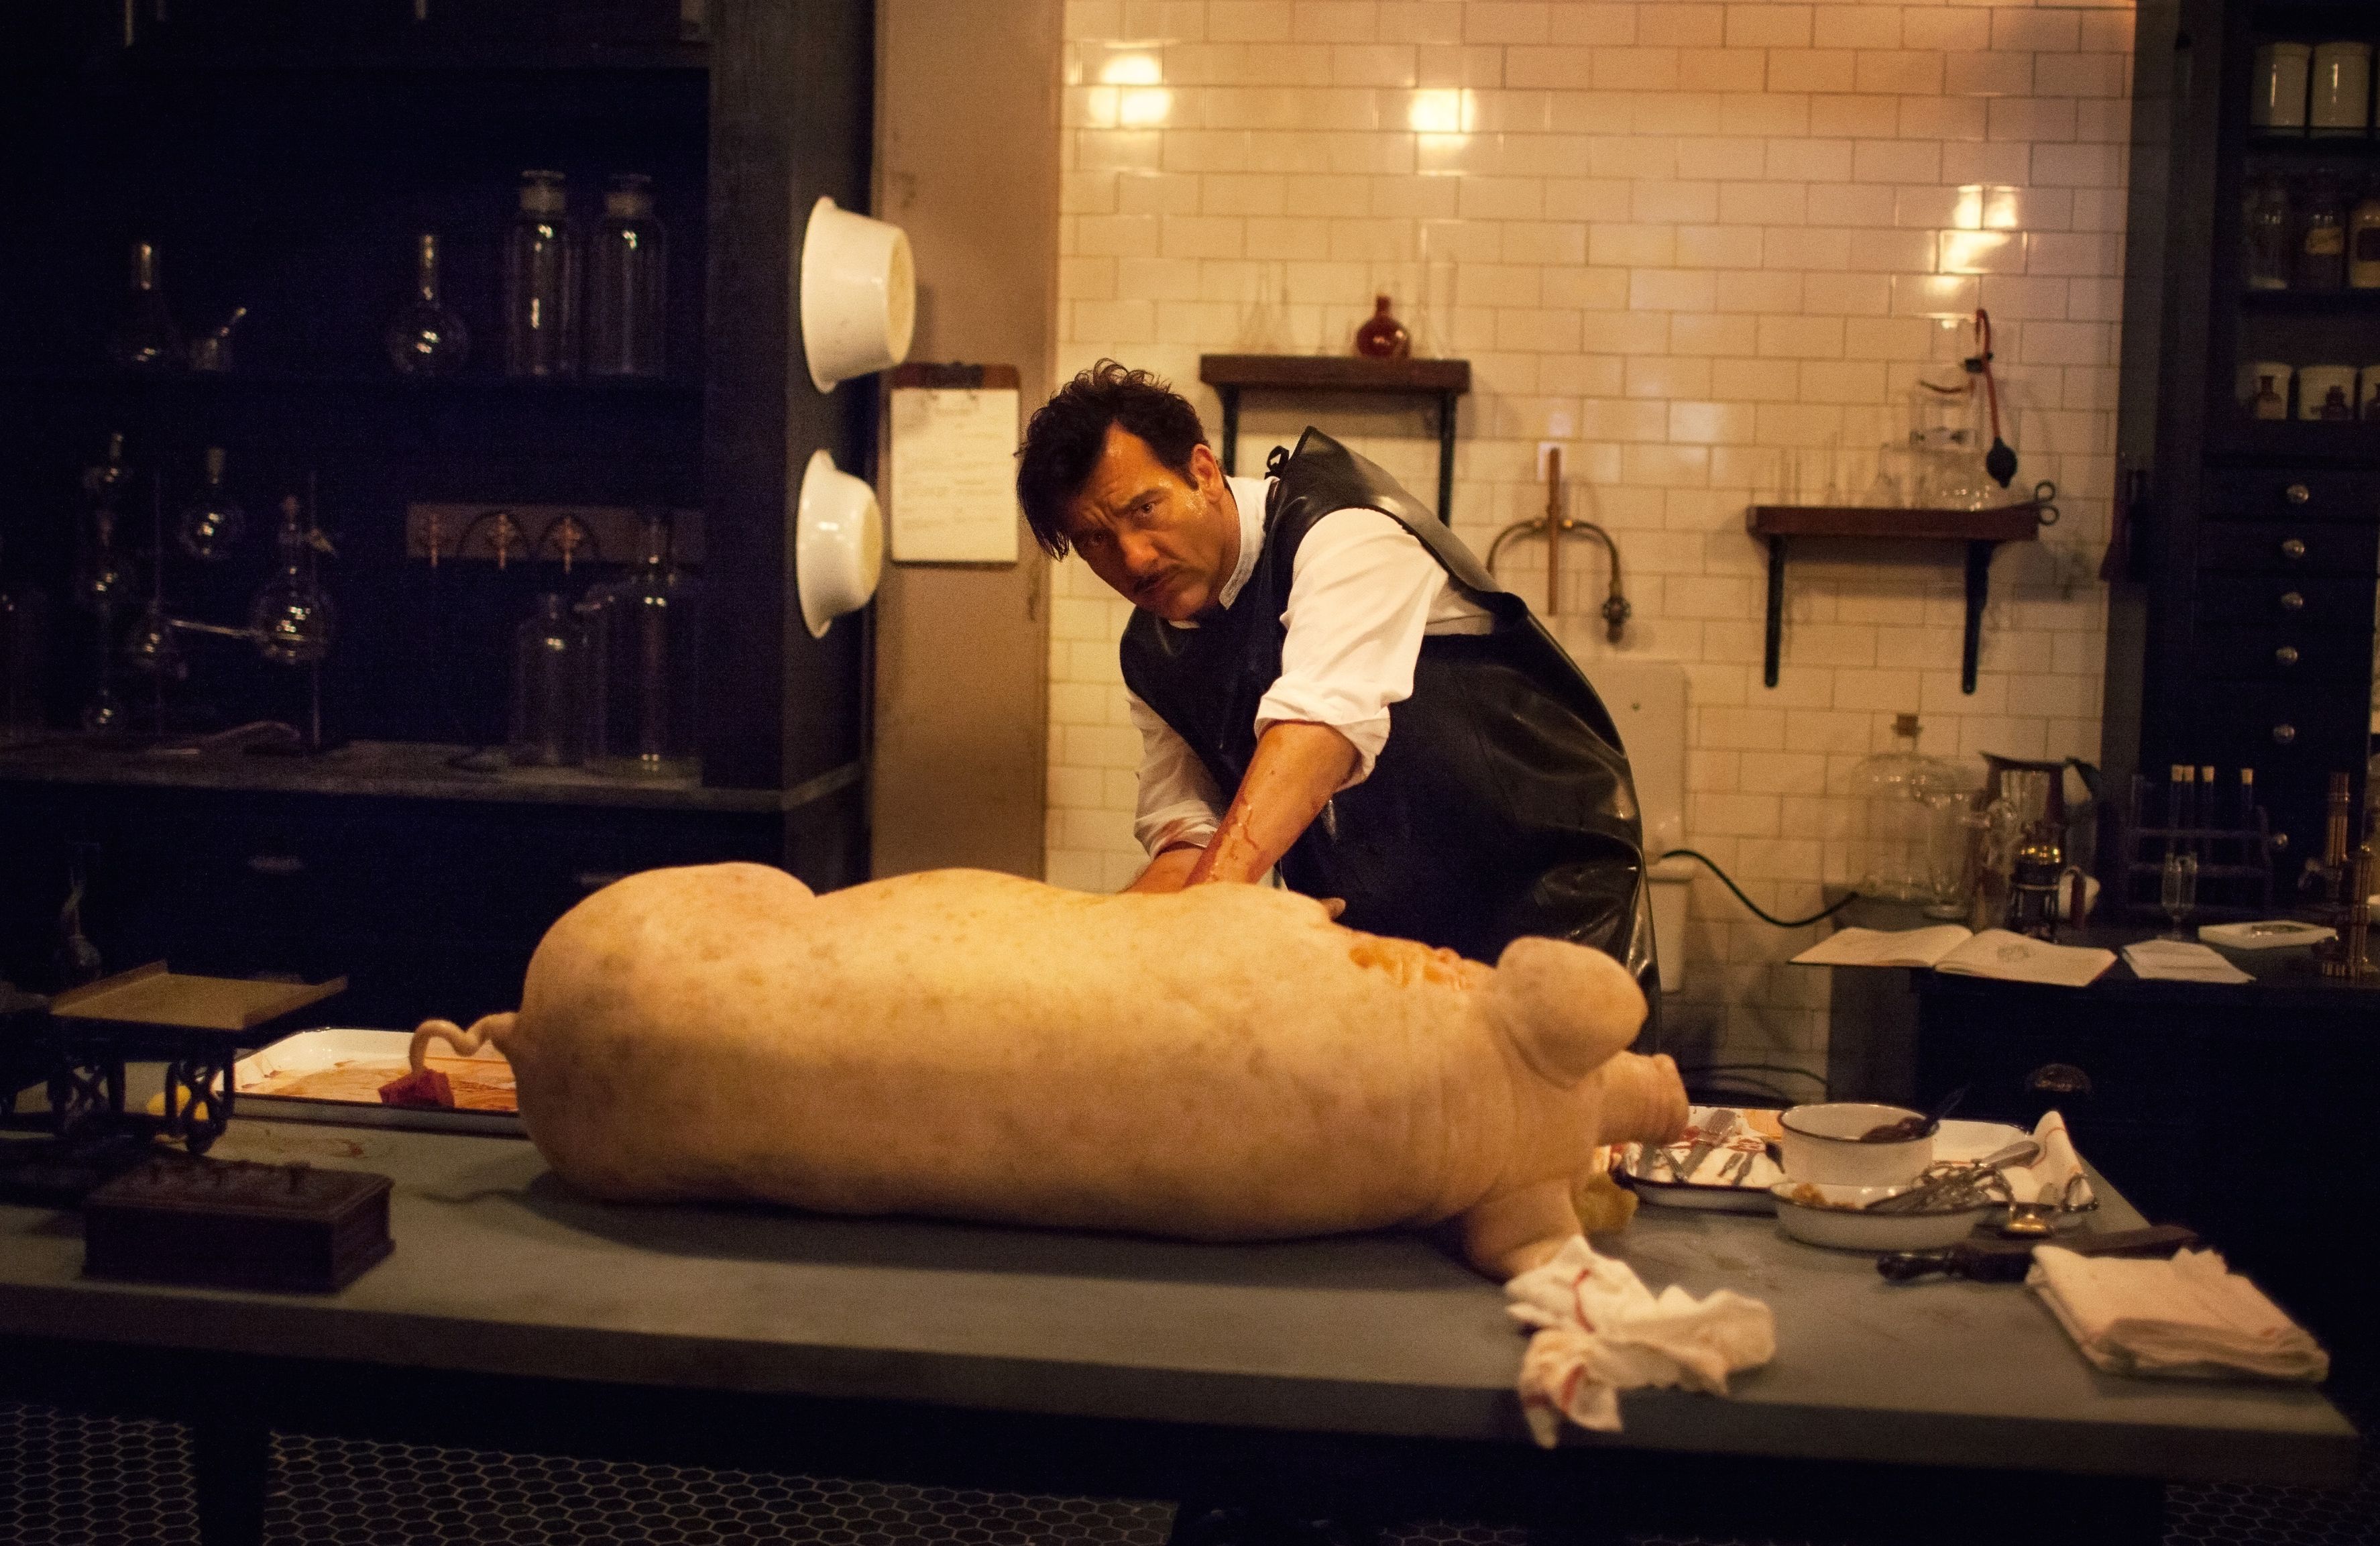 Dr. John W. Thackery operates on a pig in The Knick